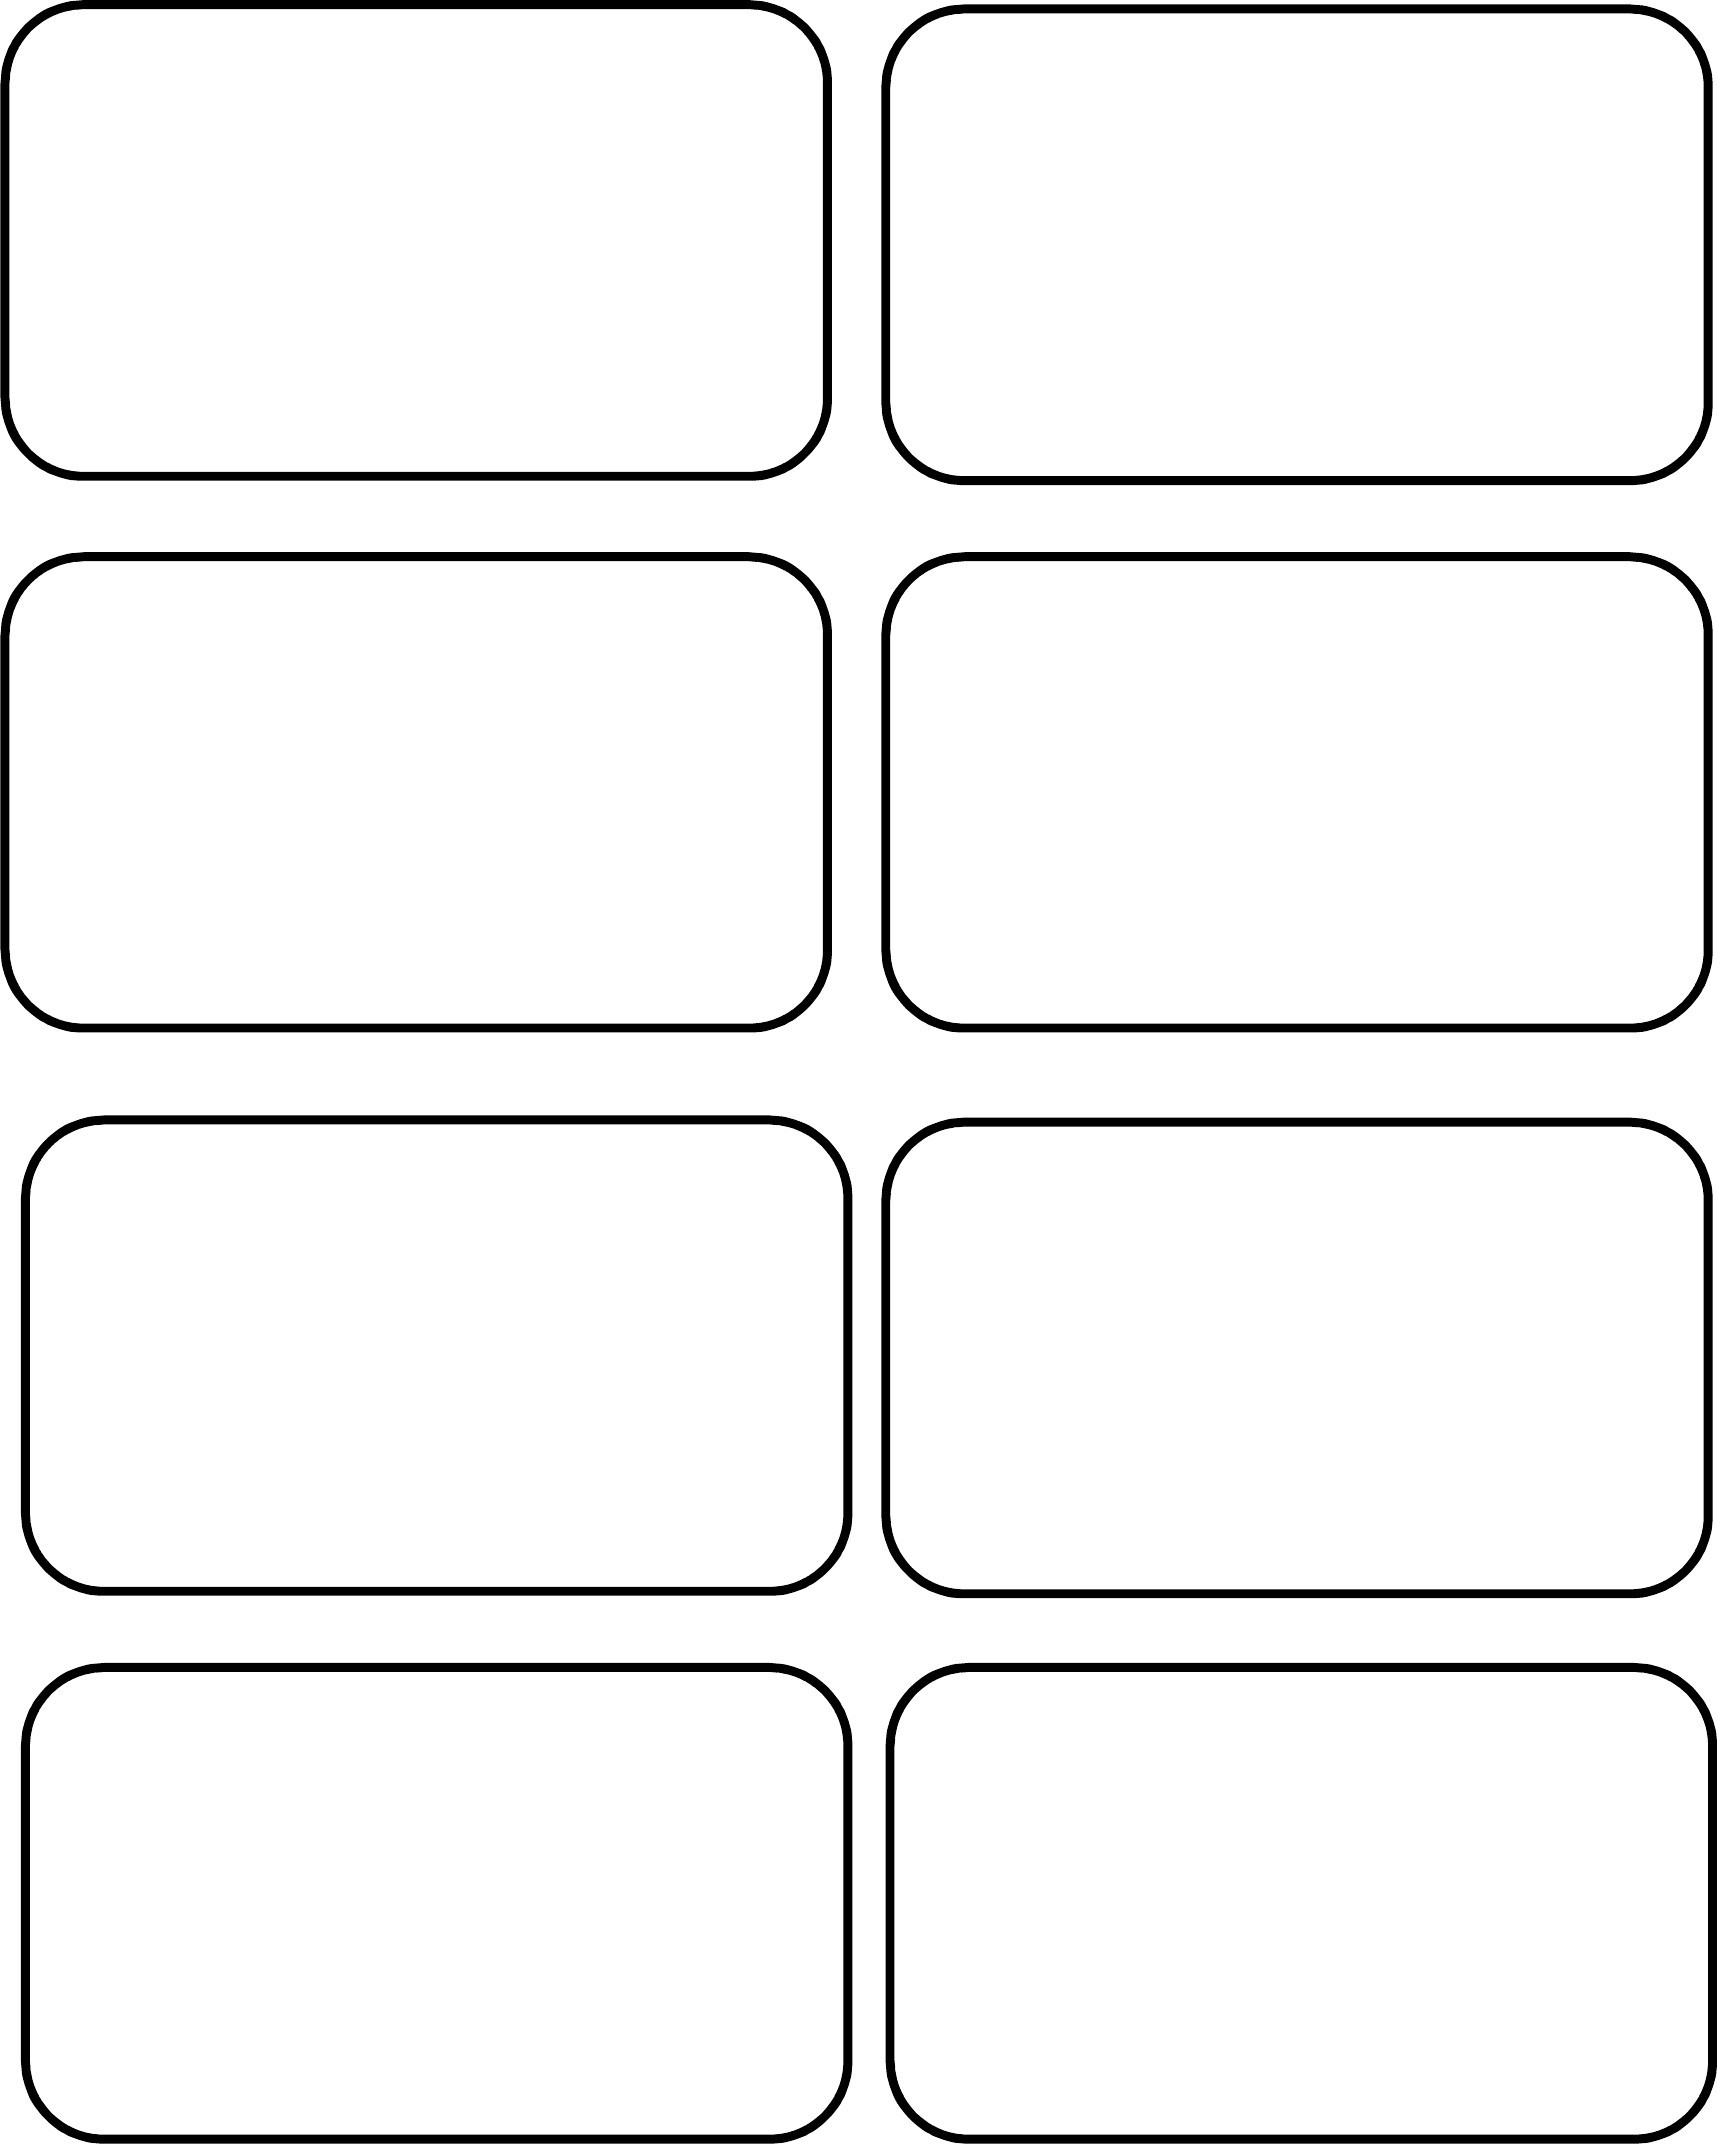 Name Tag Template Free Printable Best 30 Images Of Autistic Name Tag - Name Tag Template Free Printable